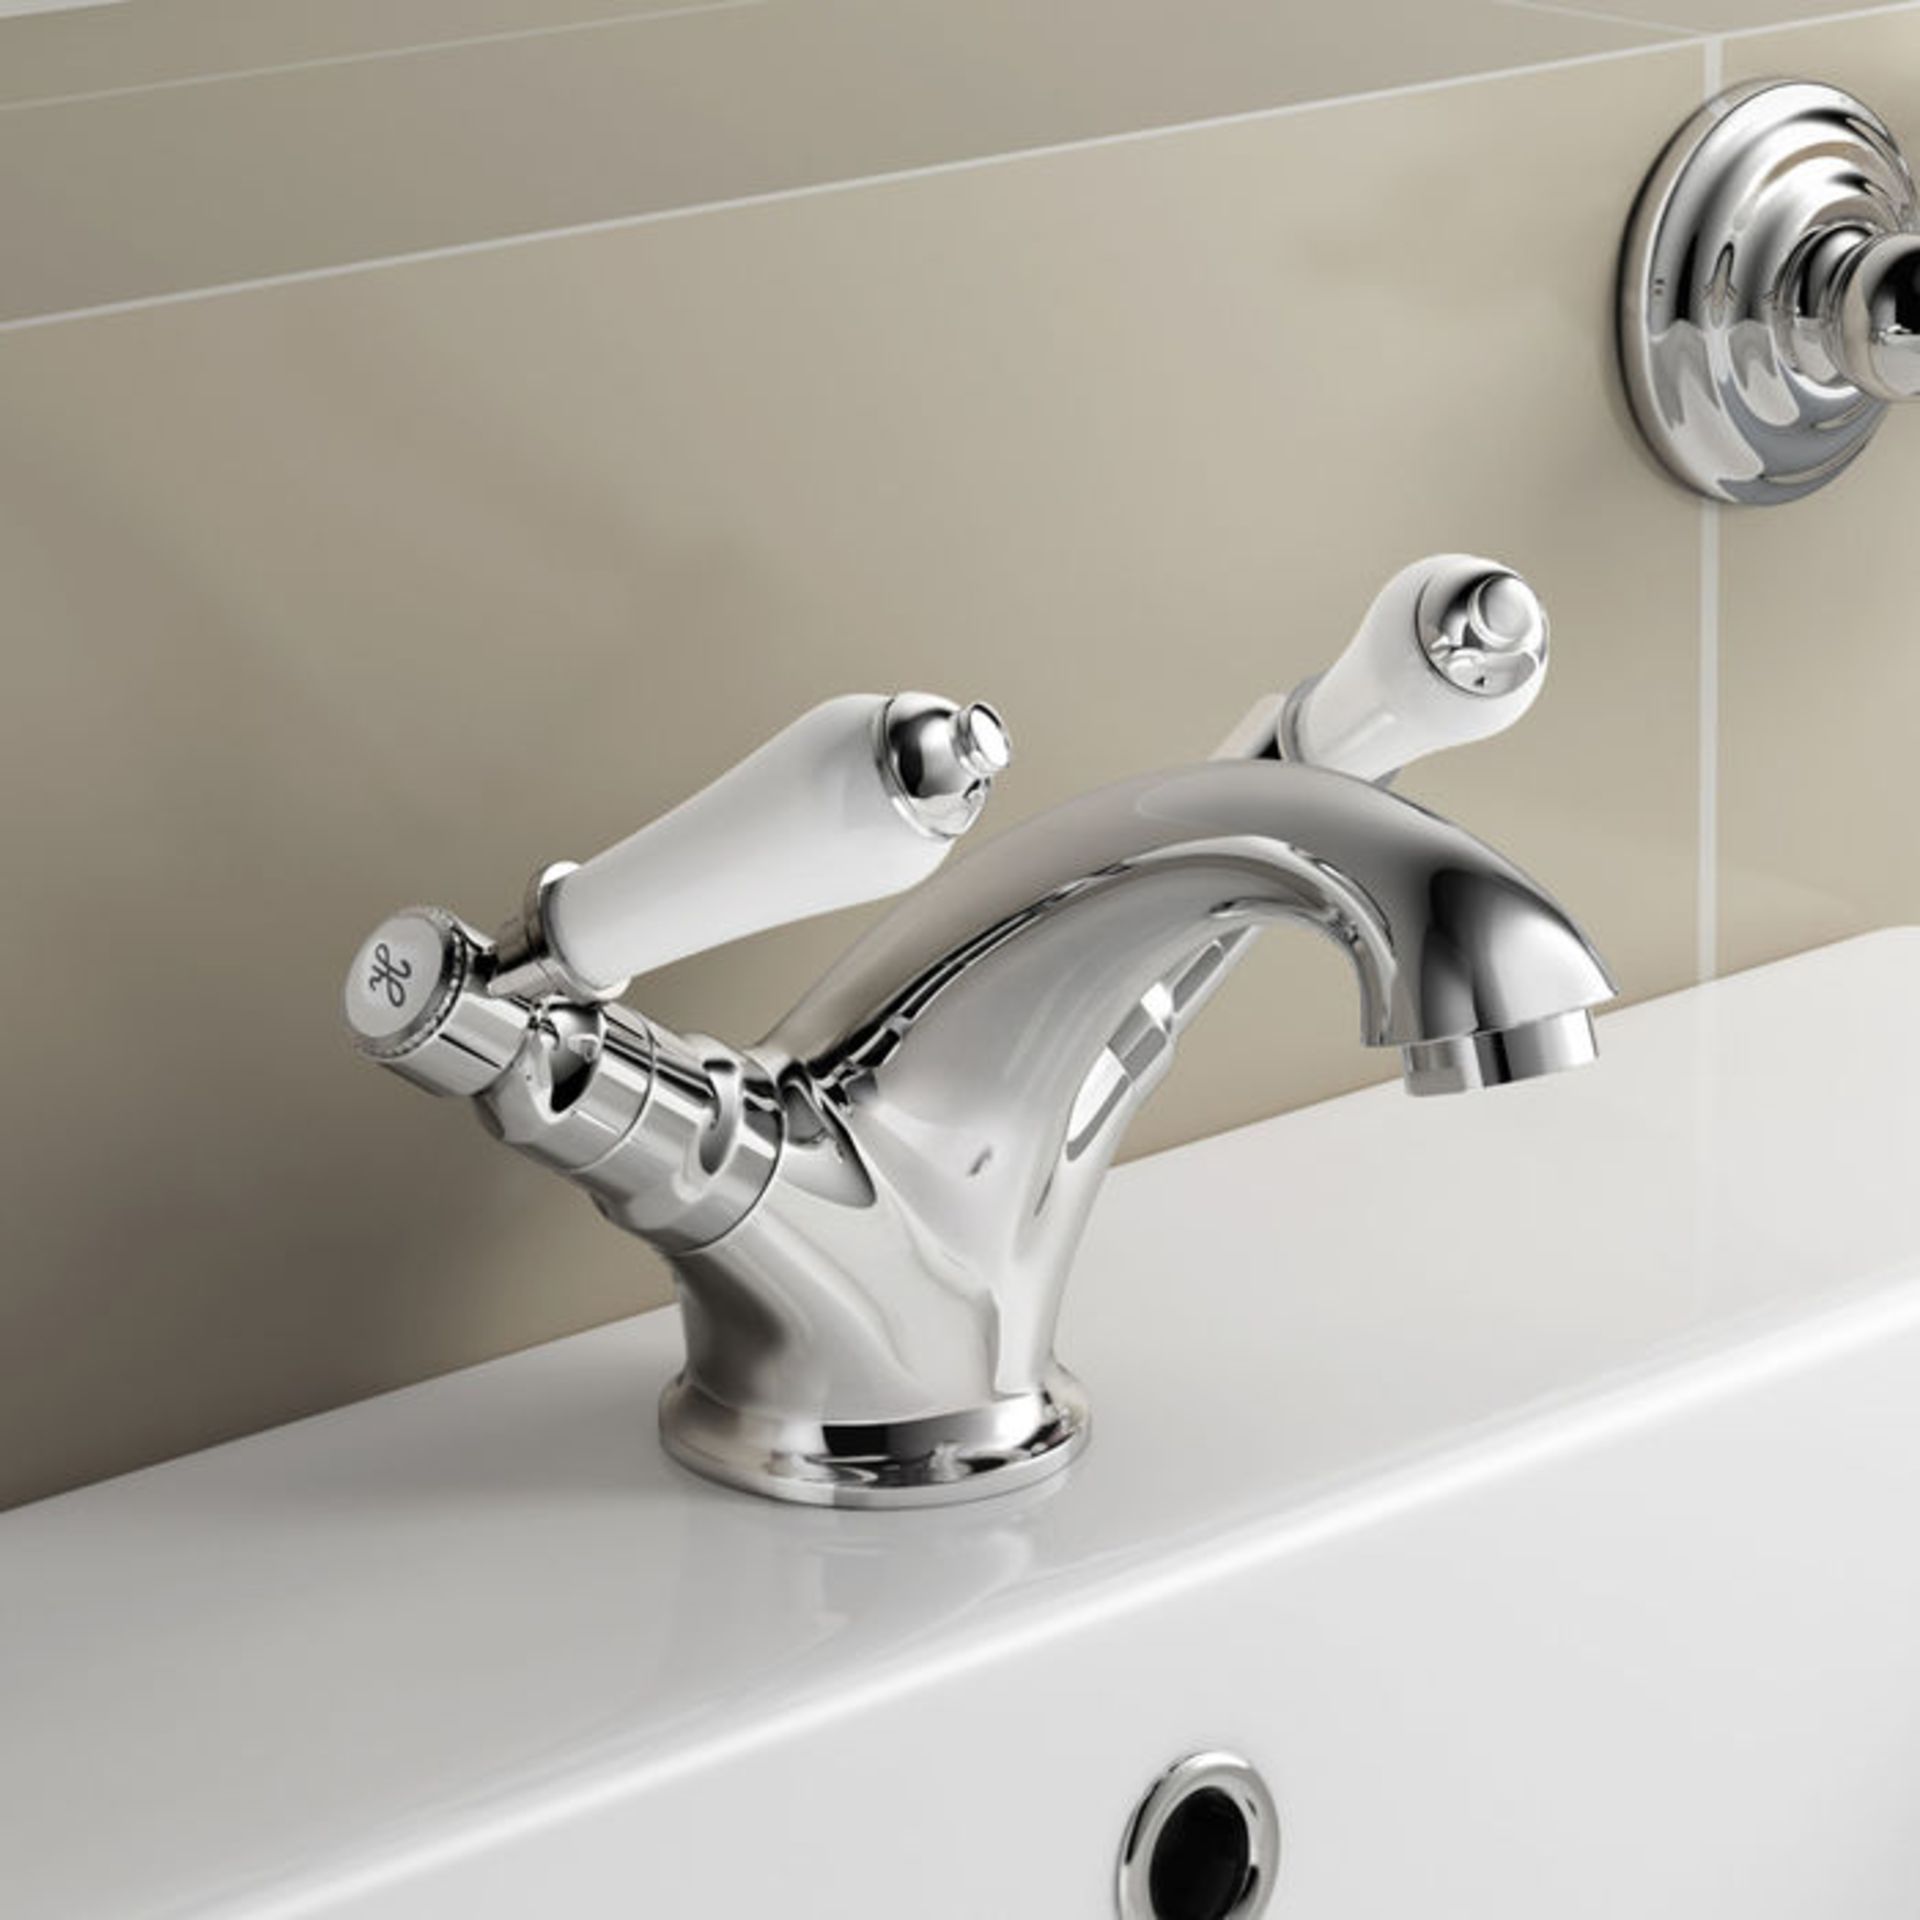 (AL31) Regal Chrome Traditional Basin Sink Lever Mixer Tap Chrome Plated Solid Brass Mixer cartridge - Image 3 of 4